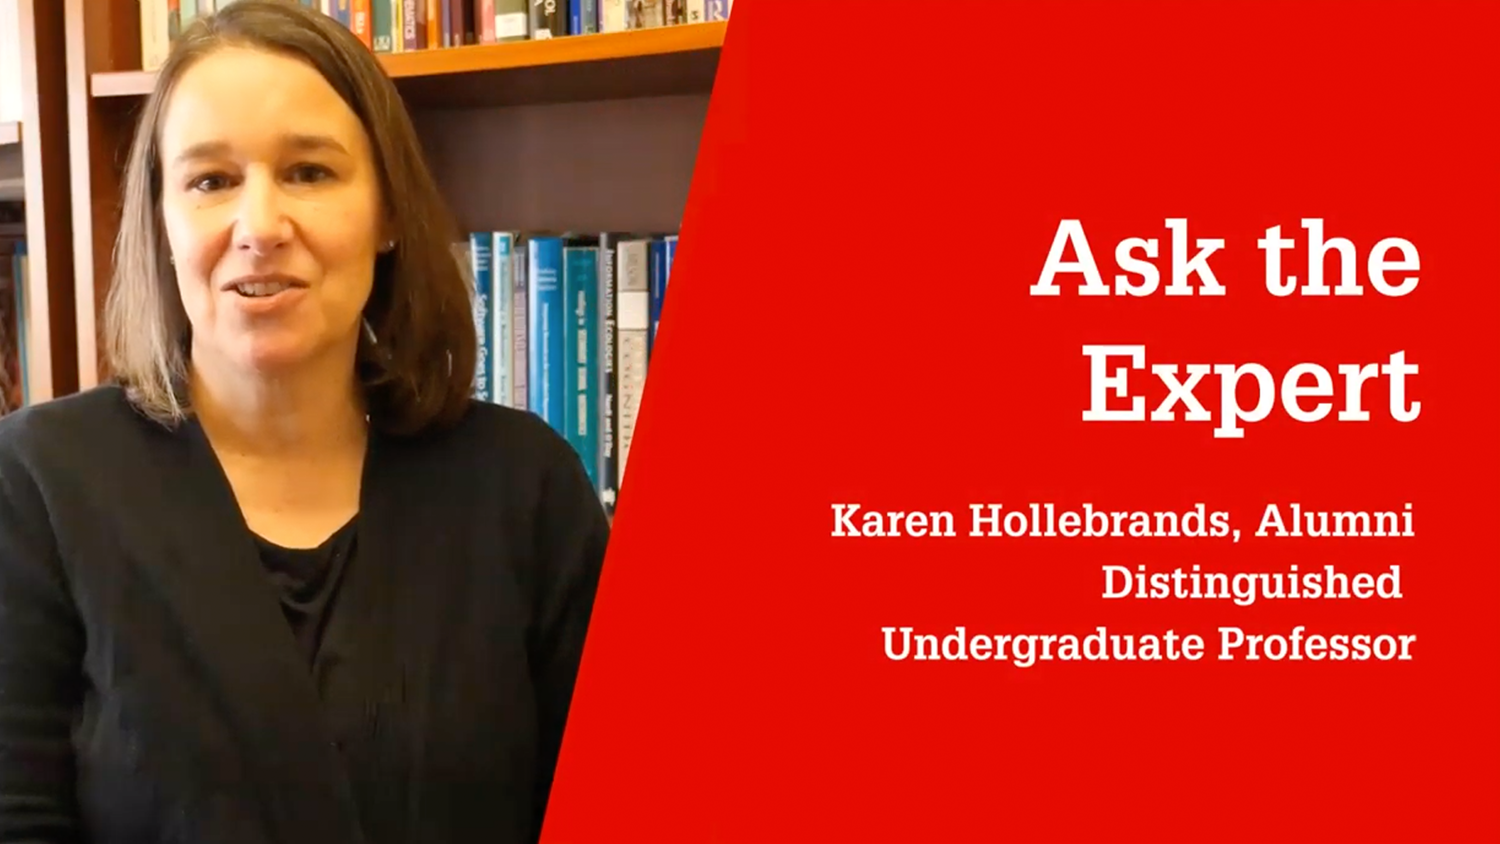 Karen Hollebrands talks about how teachers can use technology in the classroom